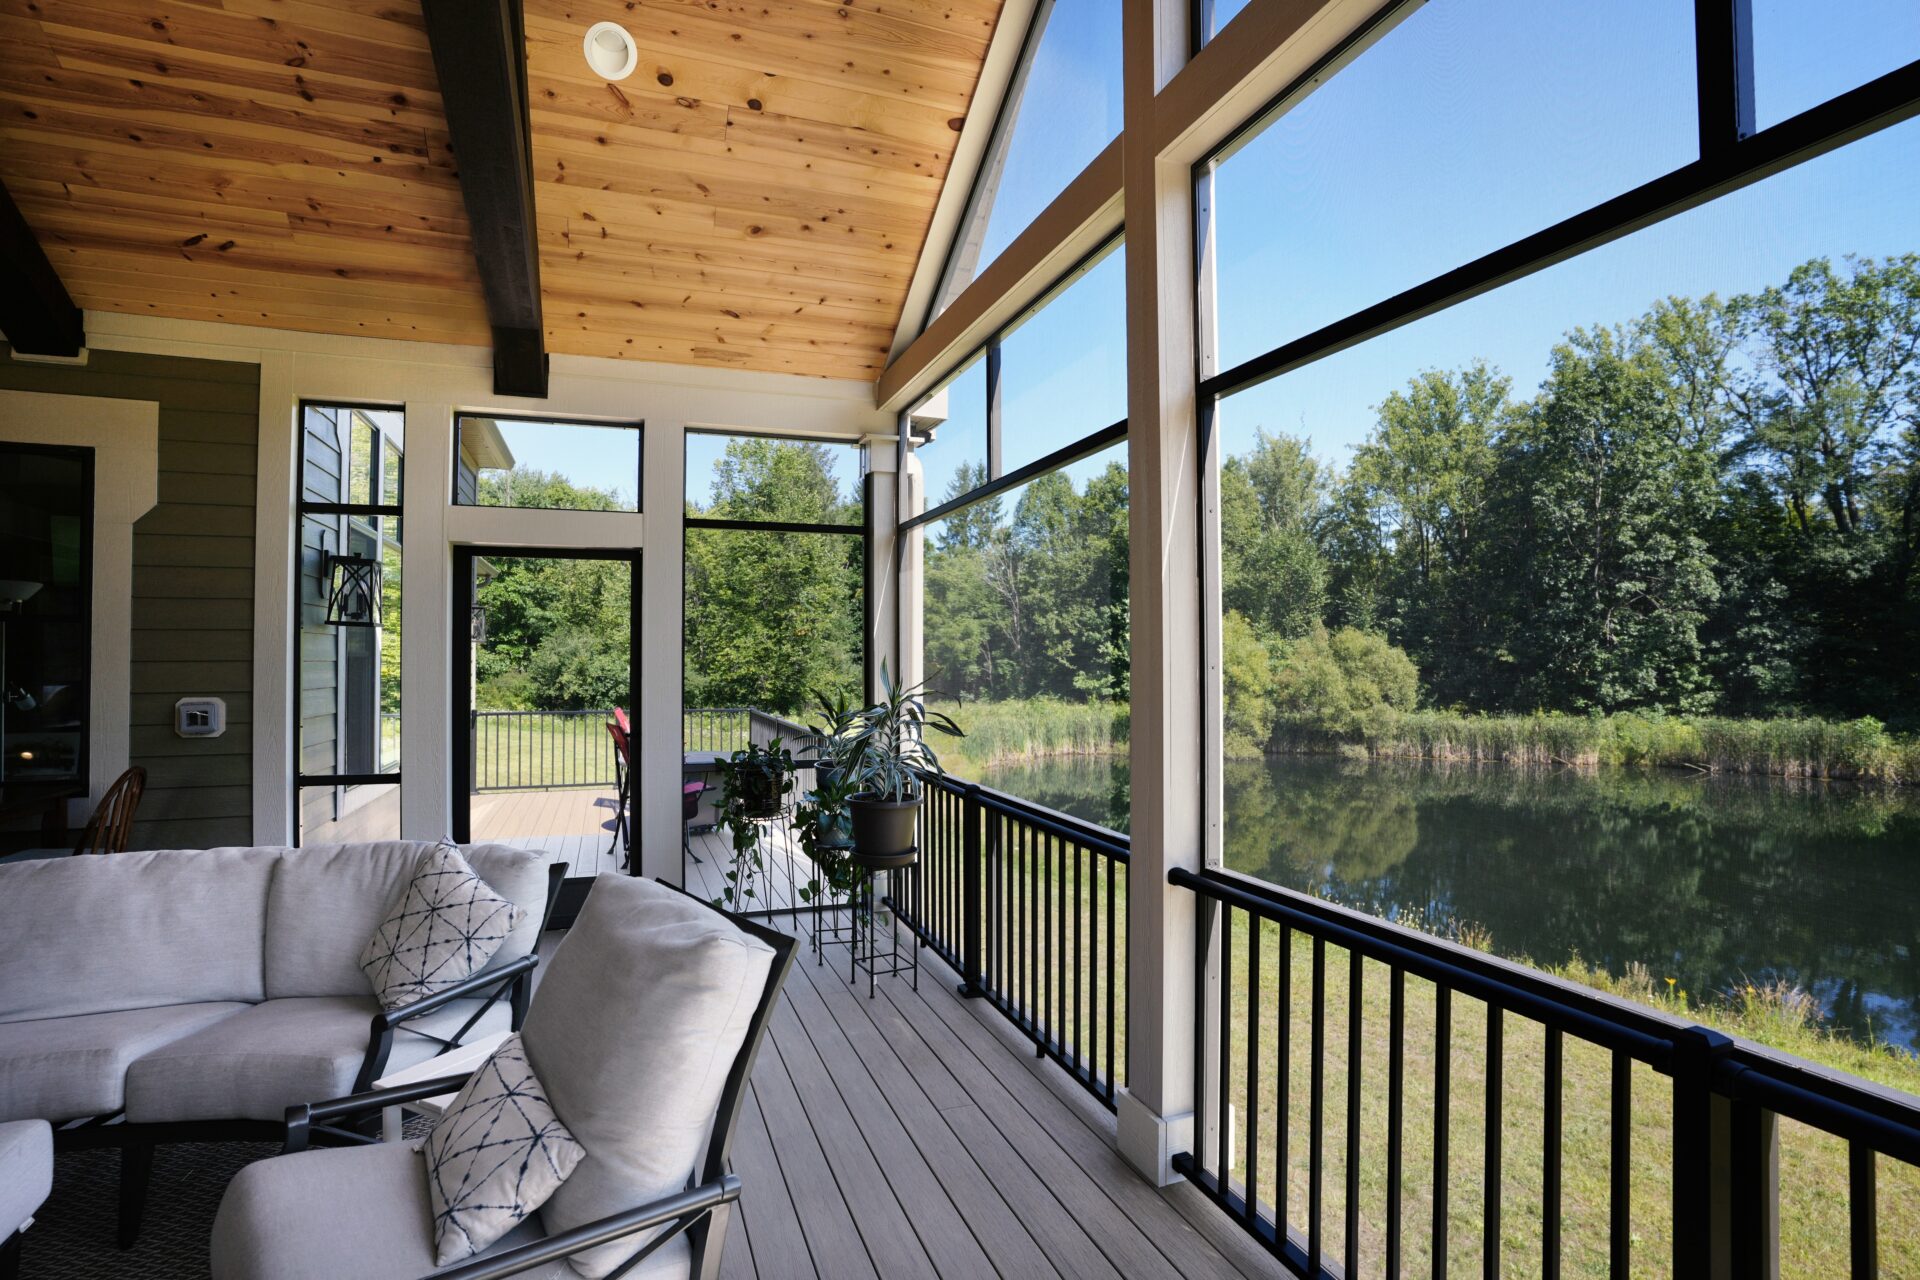 By installing fixed permanent screening on this Peninsula, Ohio home’s covered porch, creates the perfect peaceful summer retreat. Screening Solutions Ohio splined mesh into custom framing to enclose the large porch space including the porch’s peak design. With the screens, the homeowners can now sit outdoors in the summer without being bothered by insects.